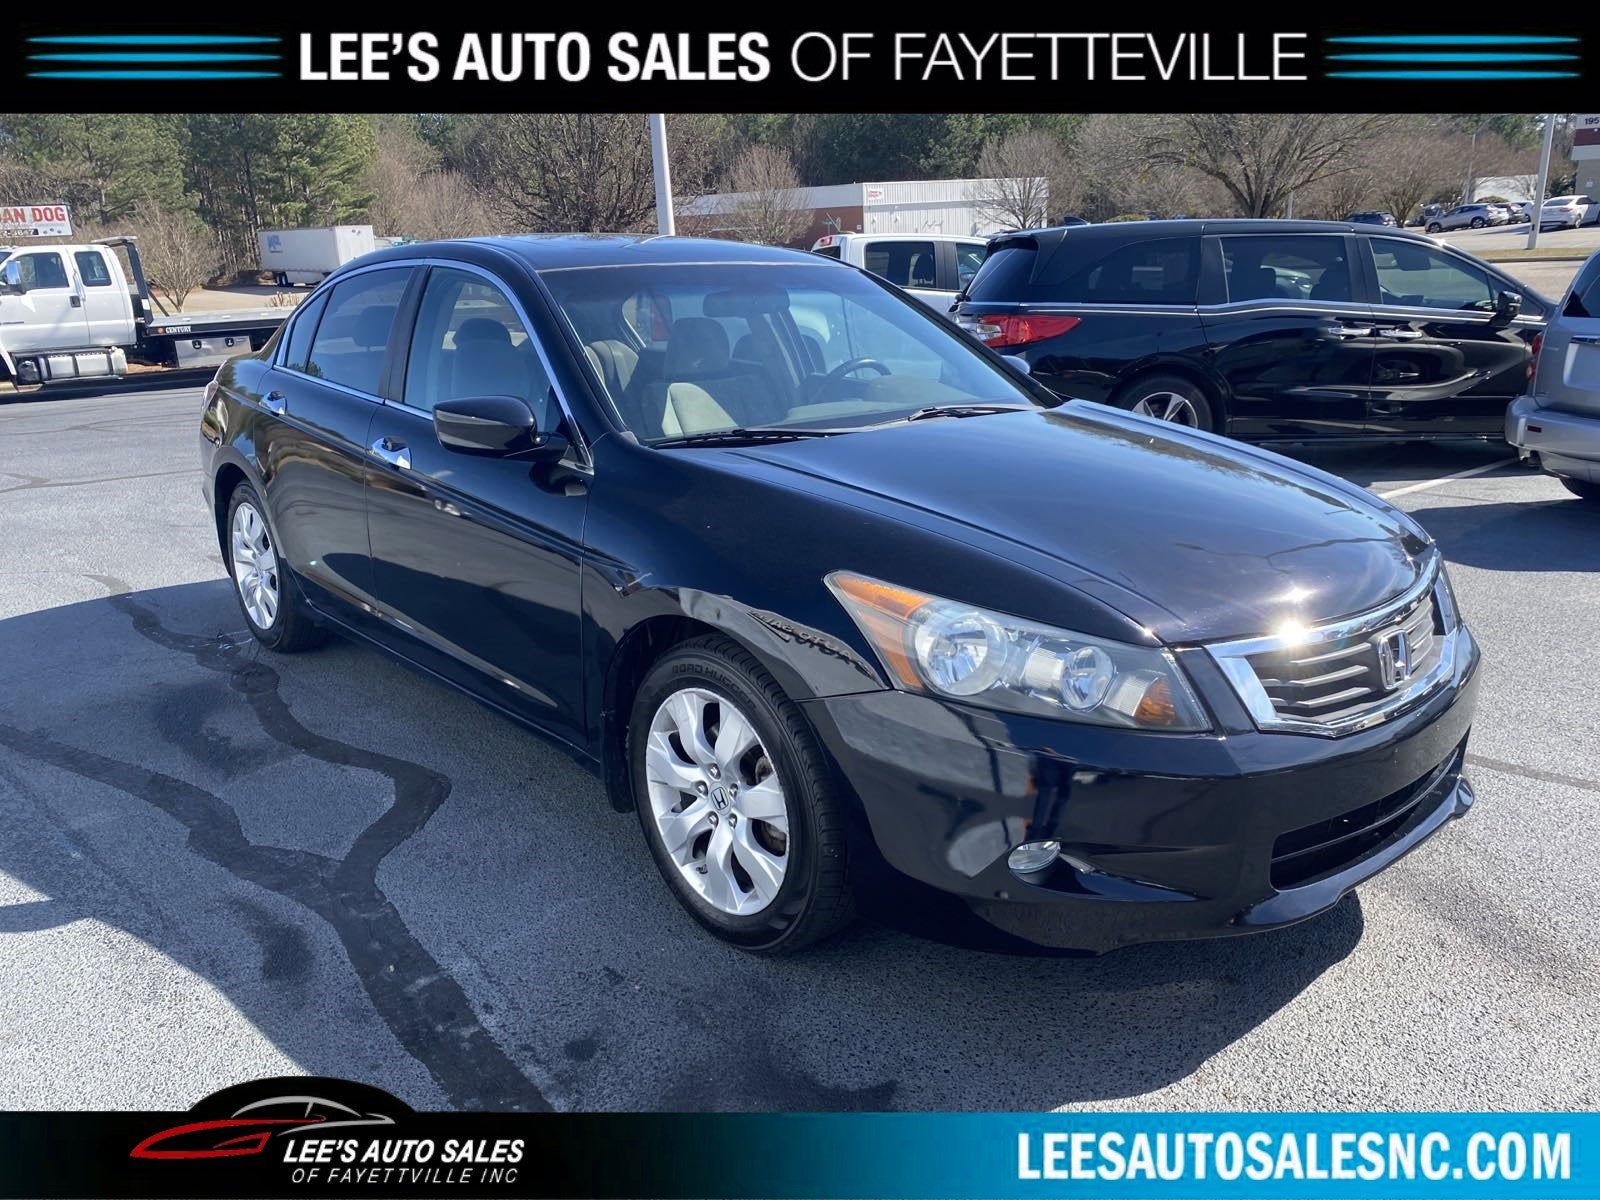 Vehicles Under 15k | Cheap Used Cars Fayetteville, NC | Lee's Auto Sales of  Fayetteville Inc